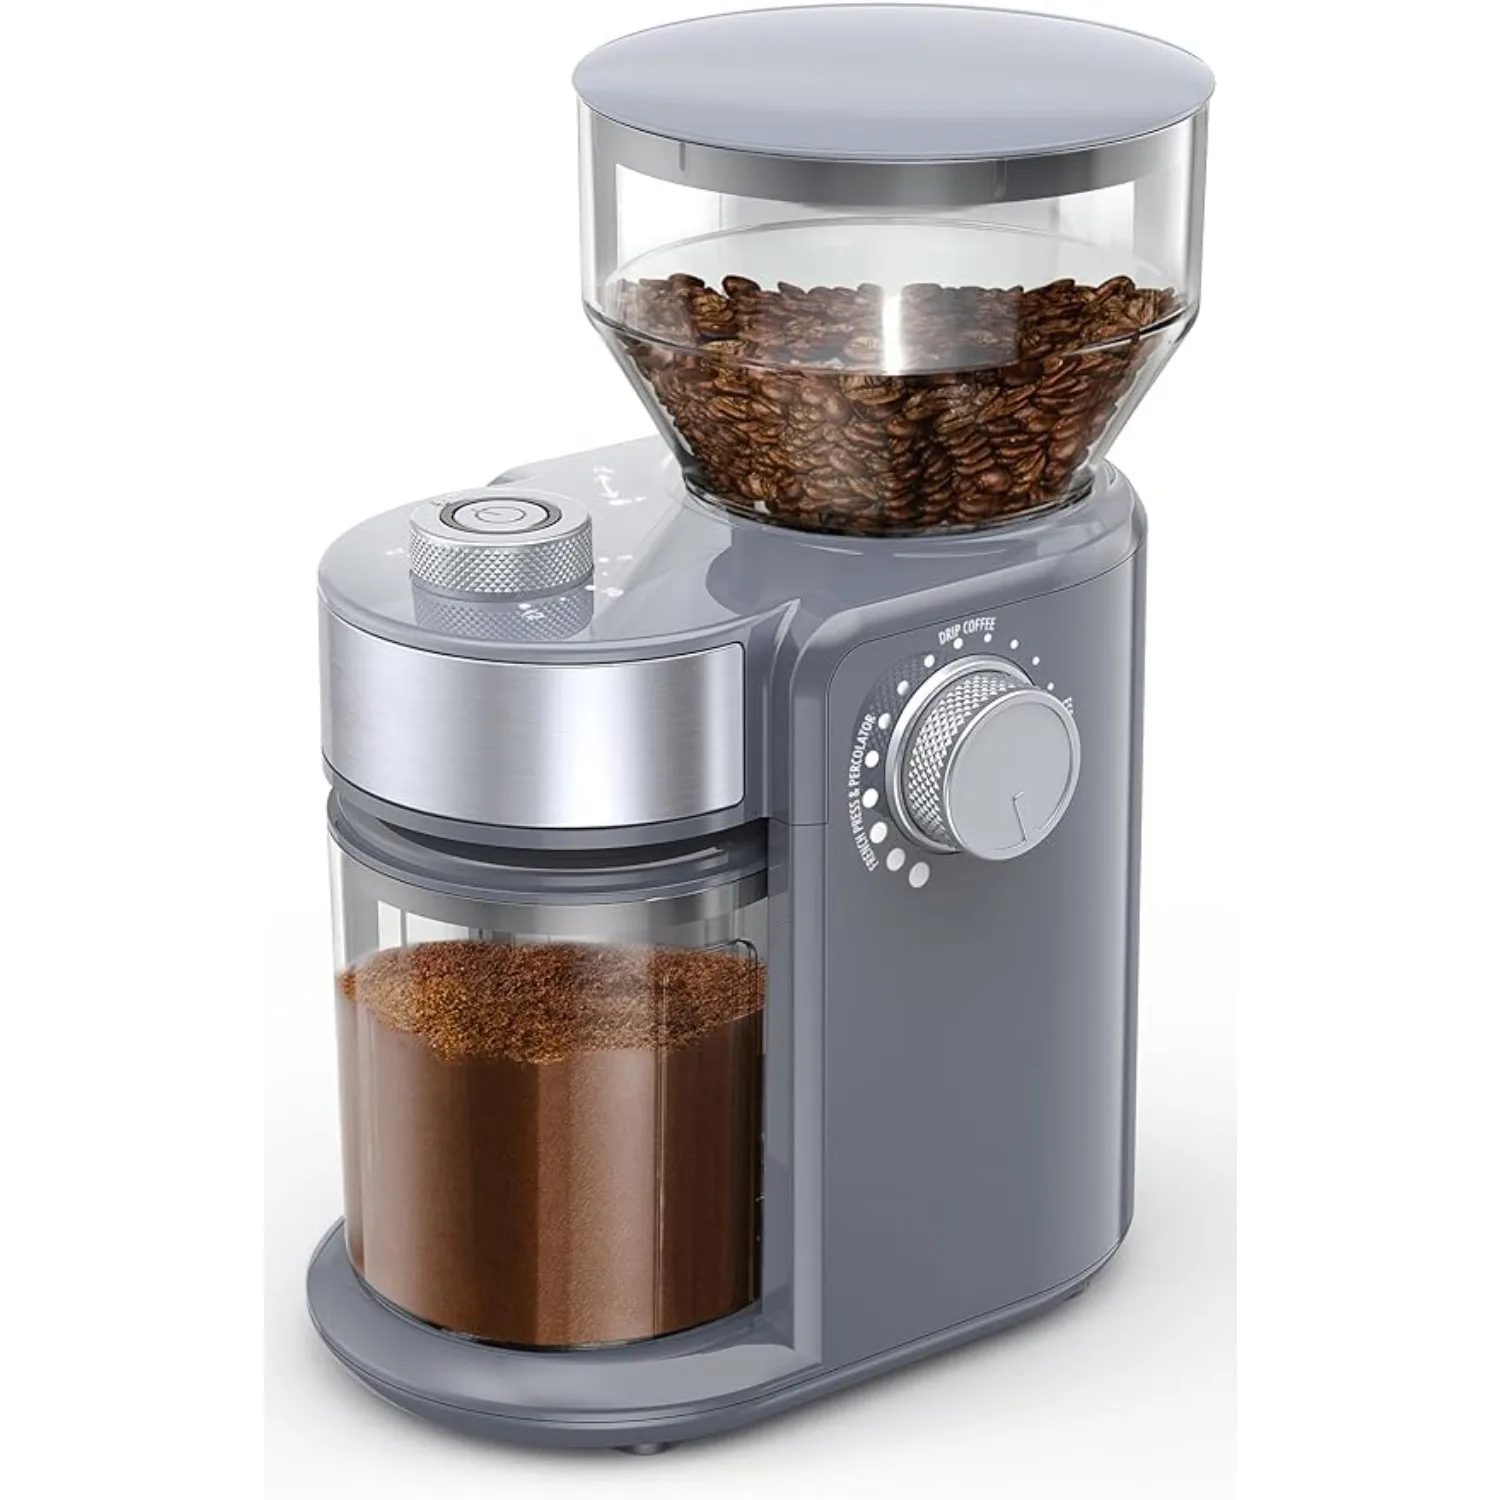 

Electric Burr Mill Coffee Grinder with 18 Precise Grind Settings for Espresso, Drip and French Press - Adjustable Burr Grinder